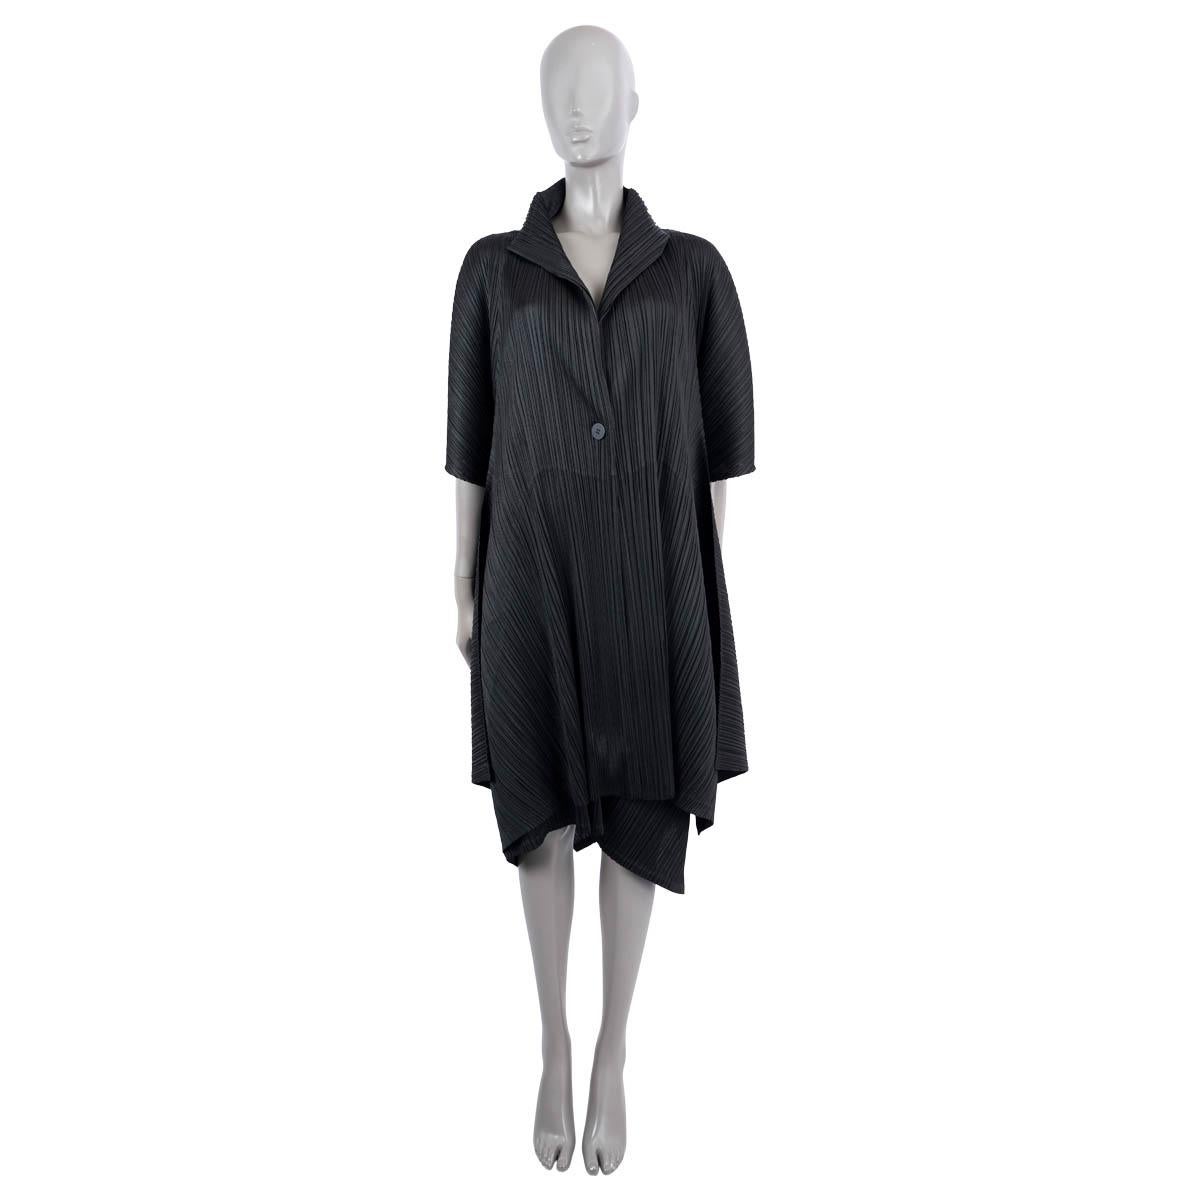 100% authentic Issey Miyake Pleats Please asymmetric short sleeve pleated dress in black polyester (100%). The design features one-button, a flared silhouette with slit pockets on the side. Unlined. Has been worn and is in excellent.